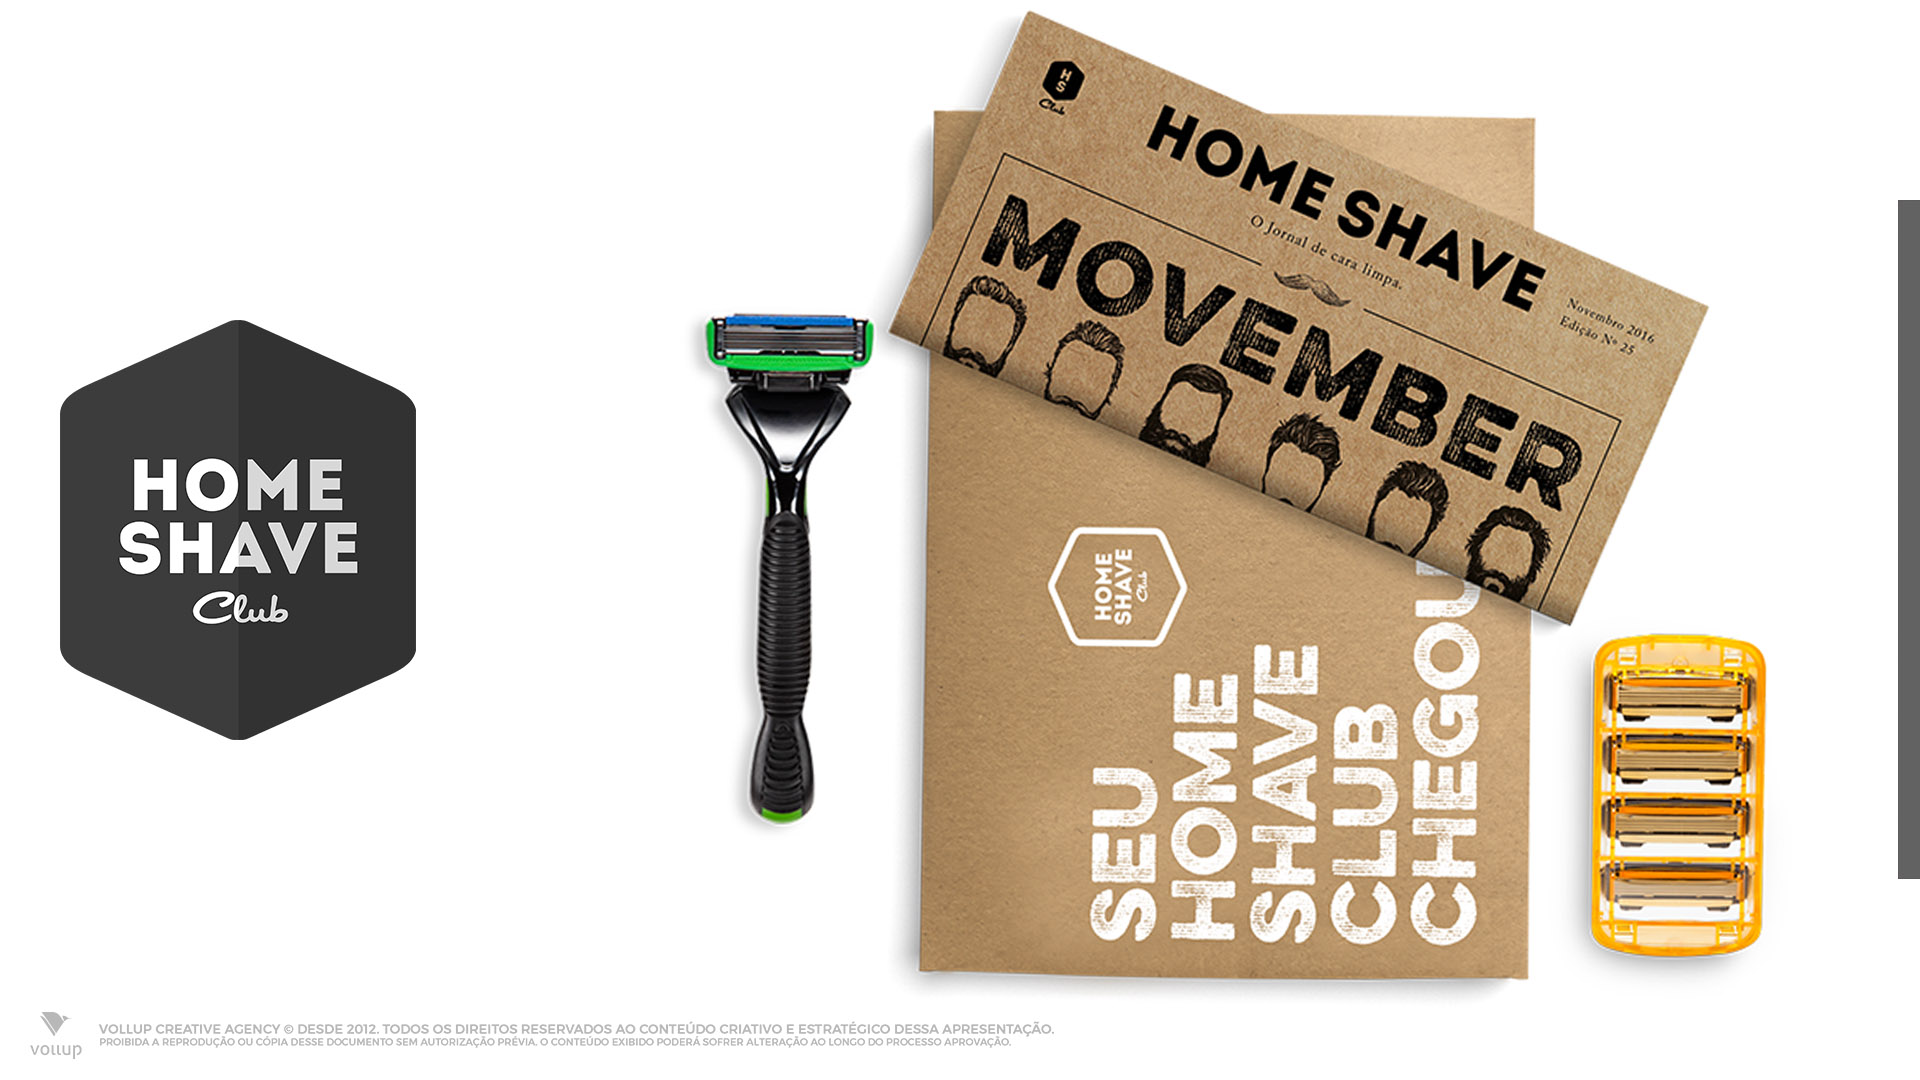 Home Shave Club